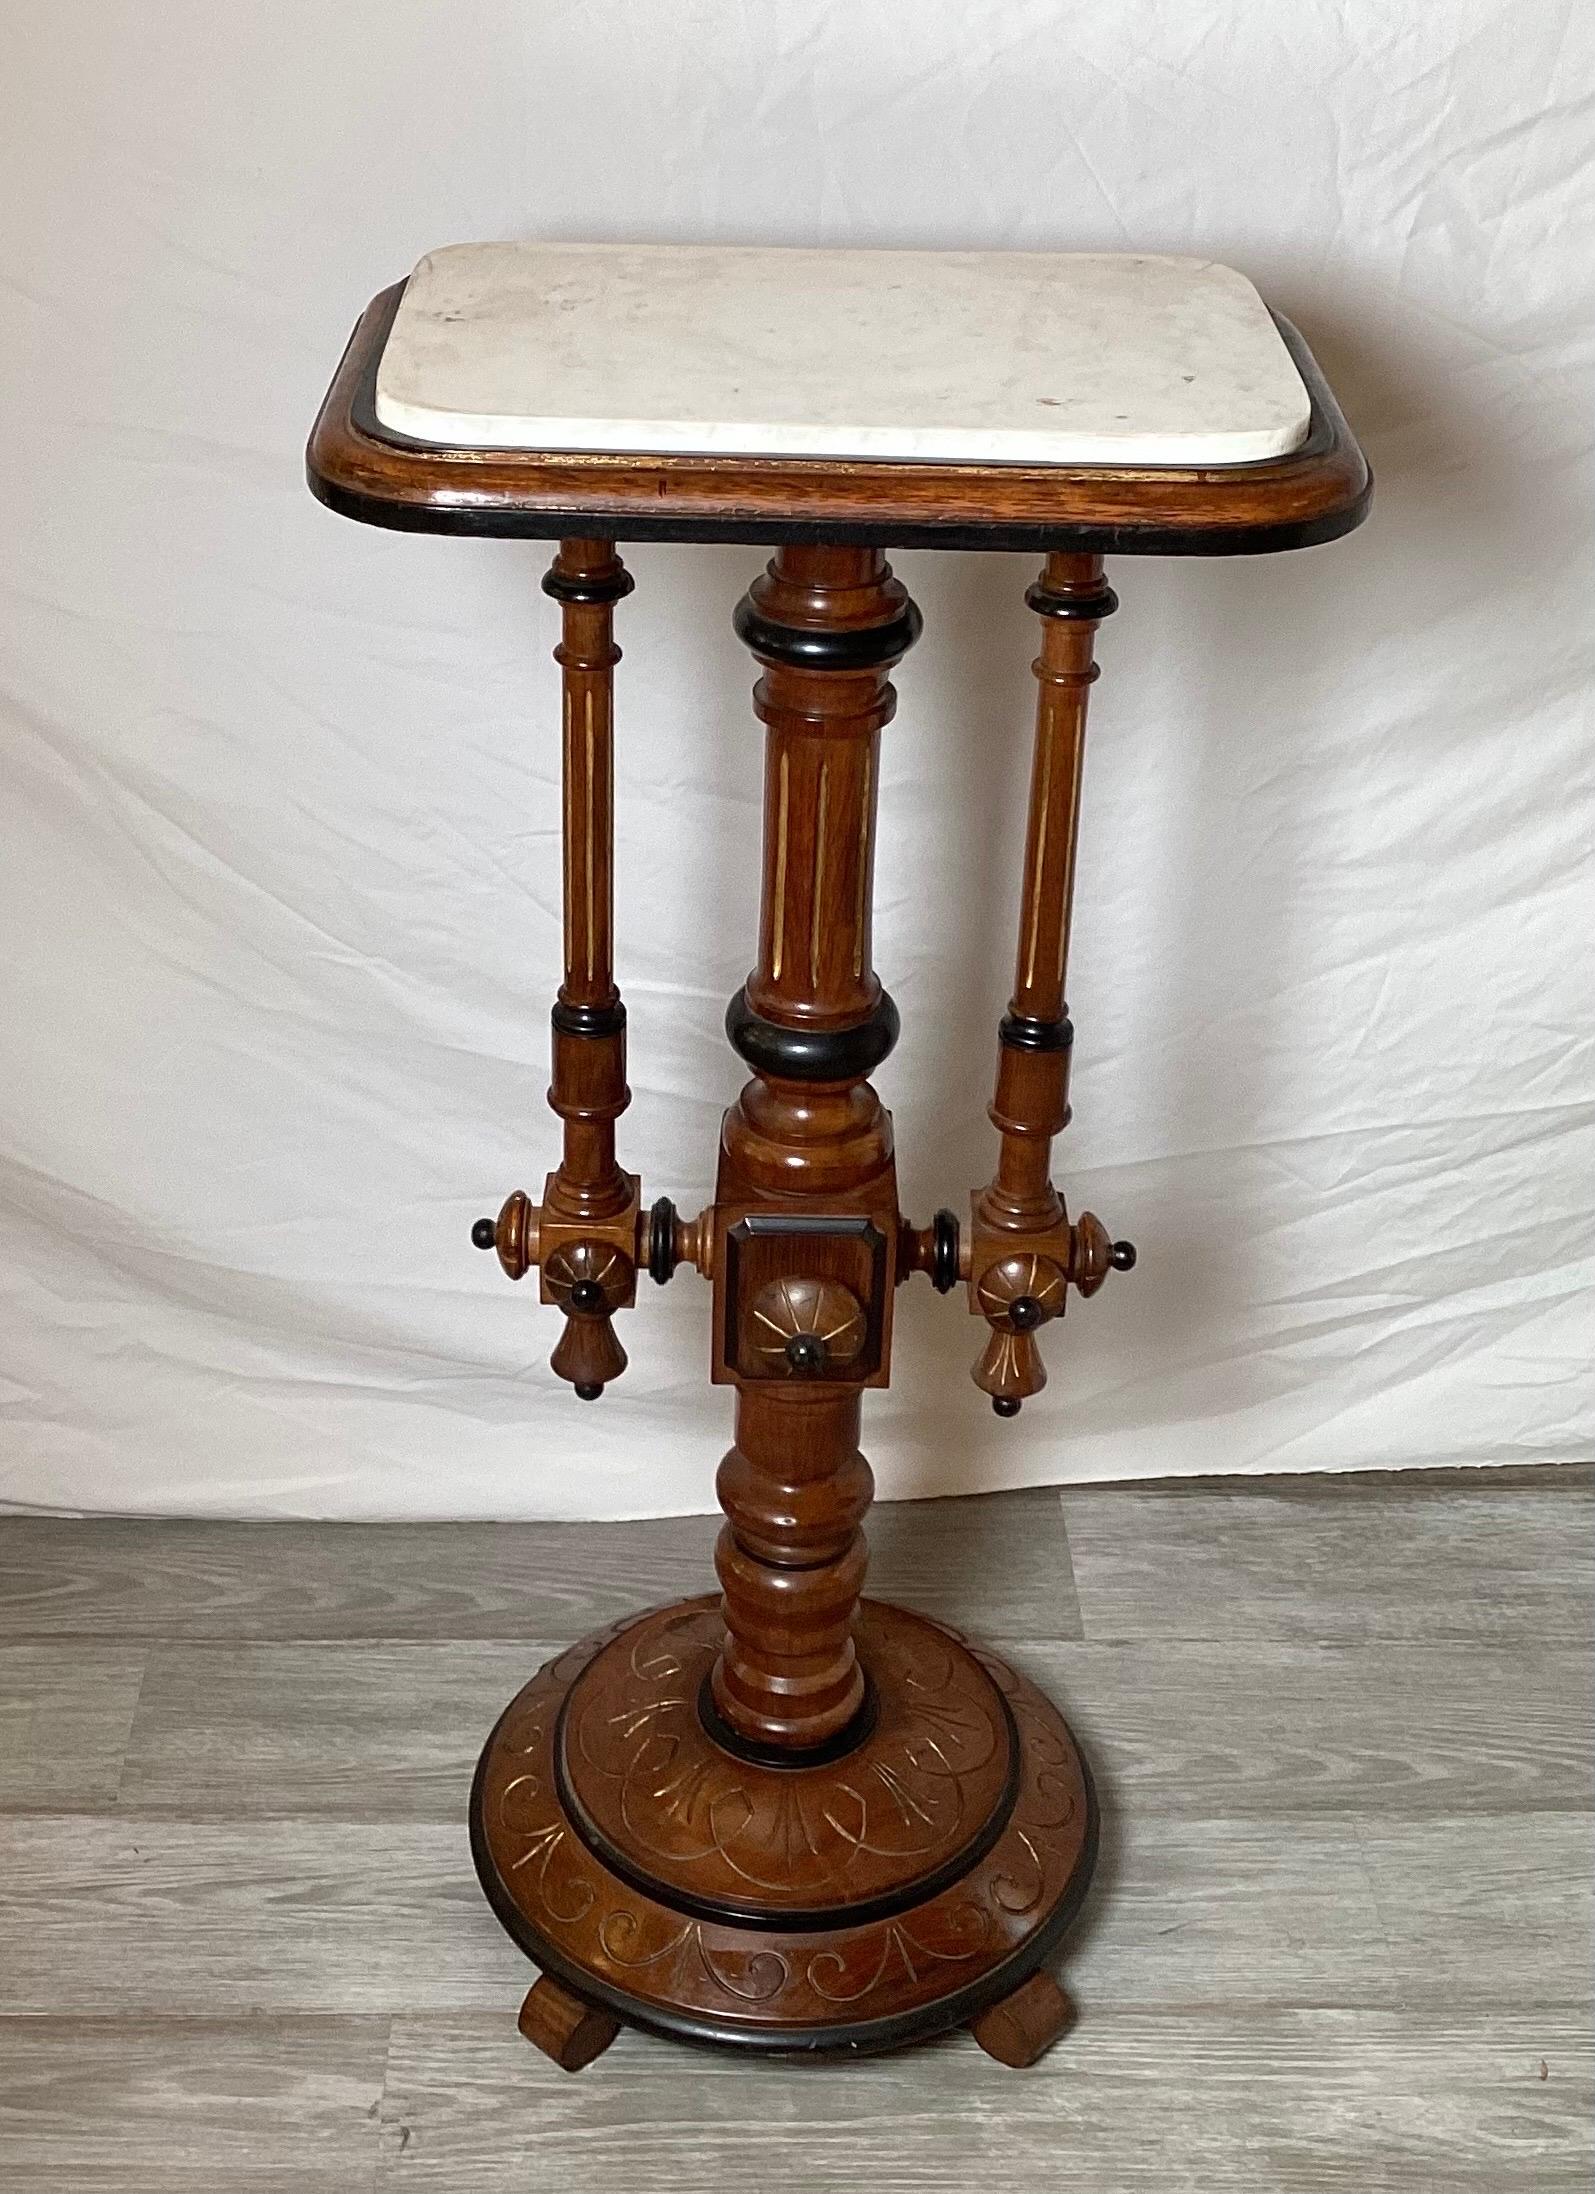 A Victorian walnut pedestal with ebonized and incised carvings with marble top, by Kilian Brothers, NYC